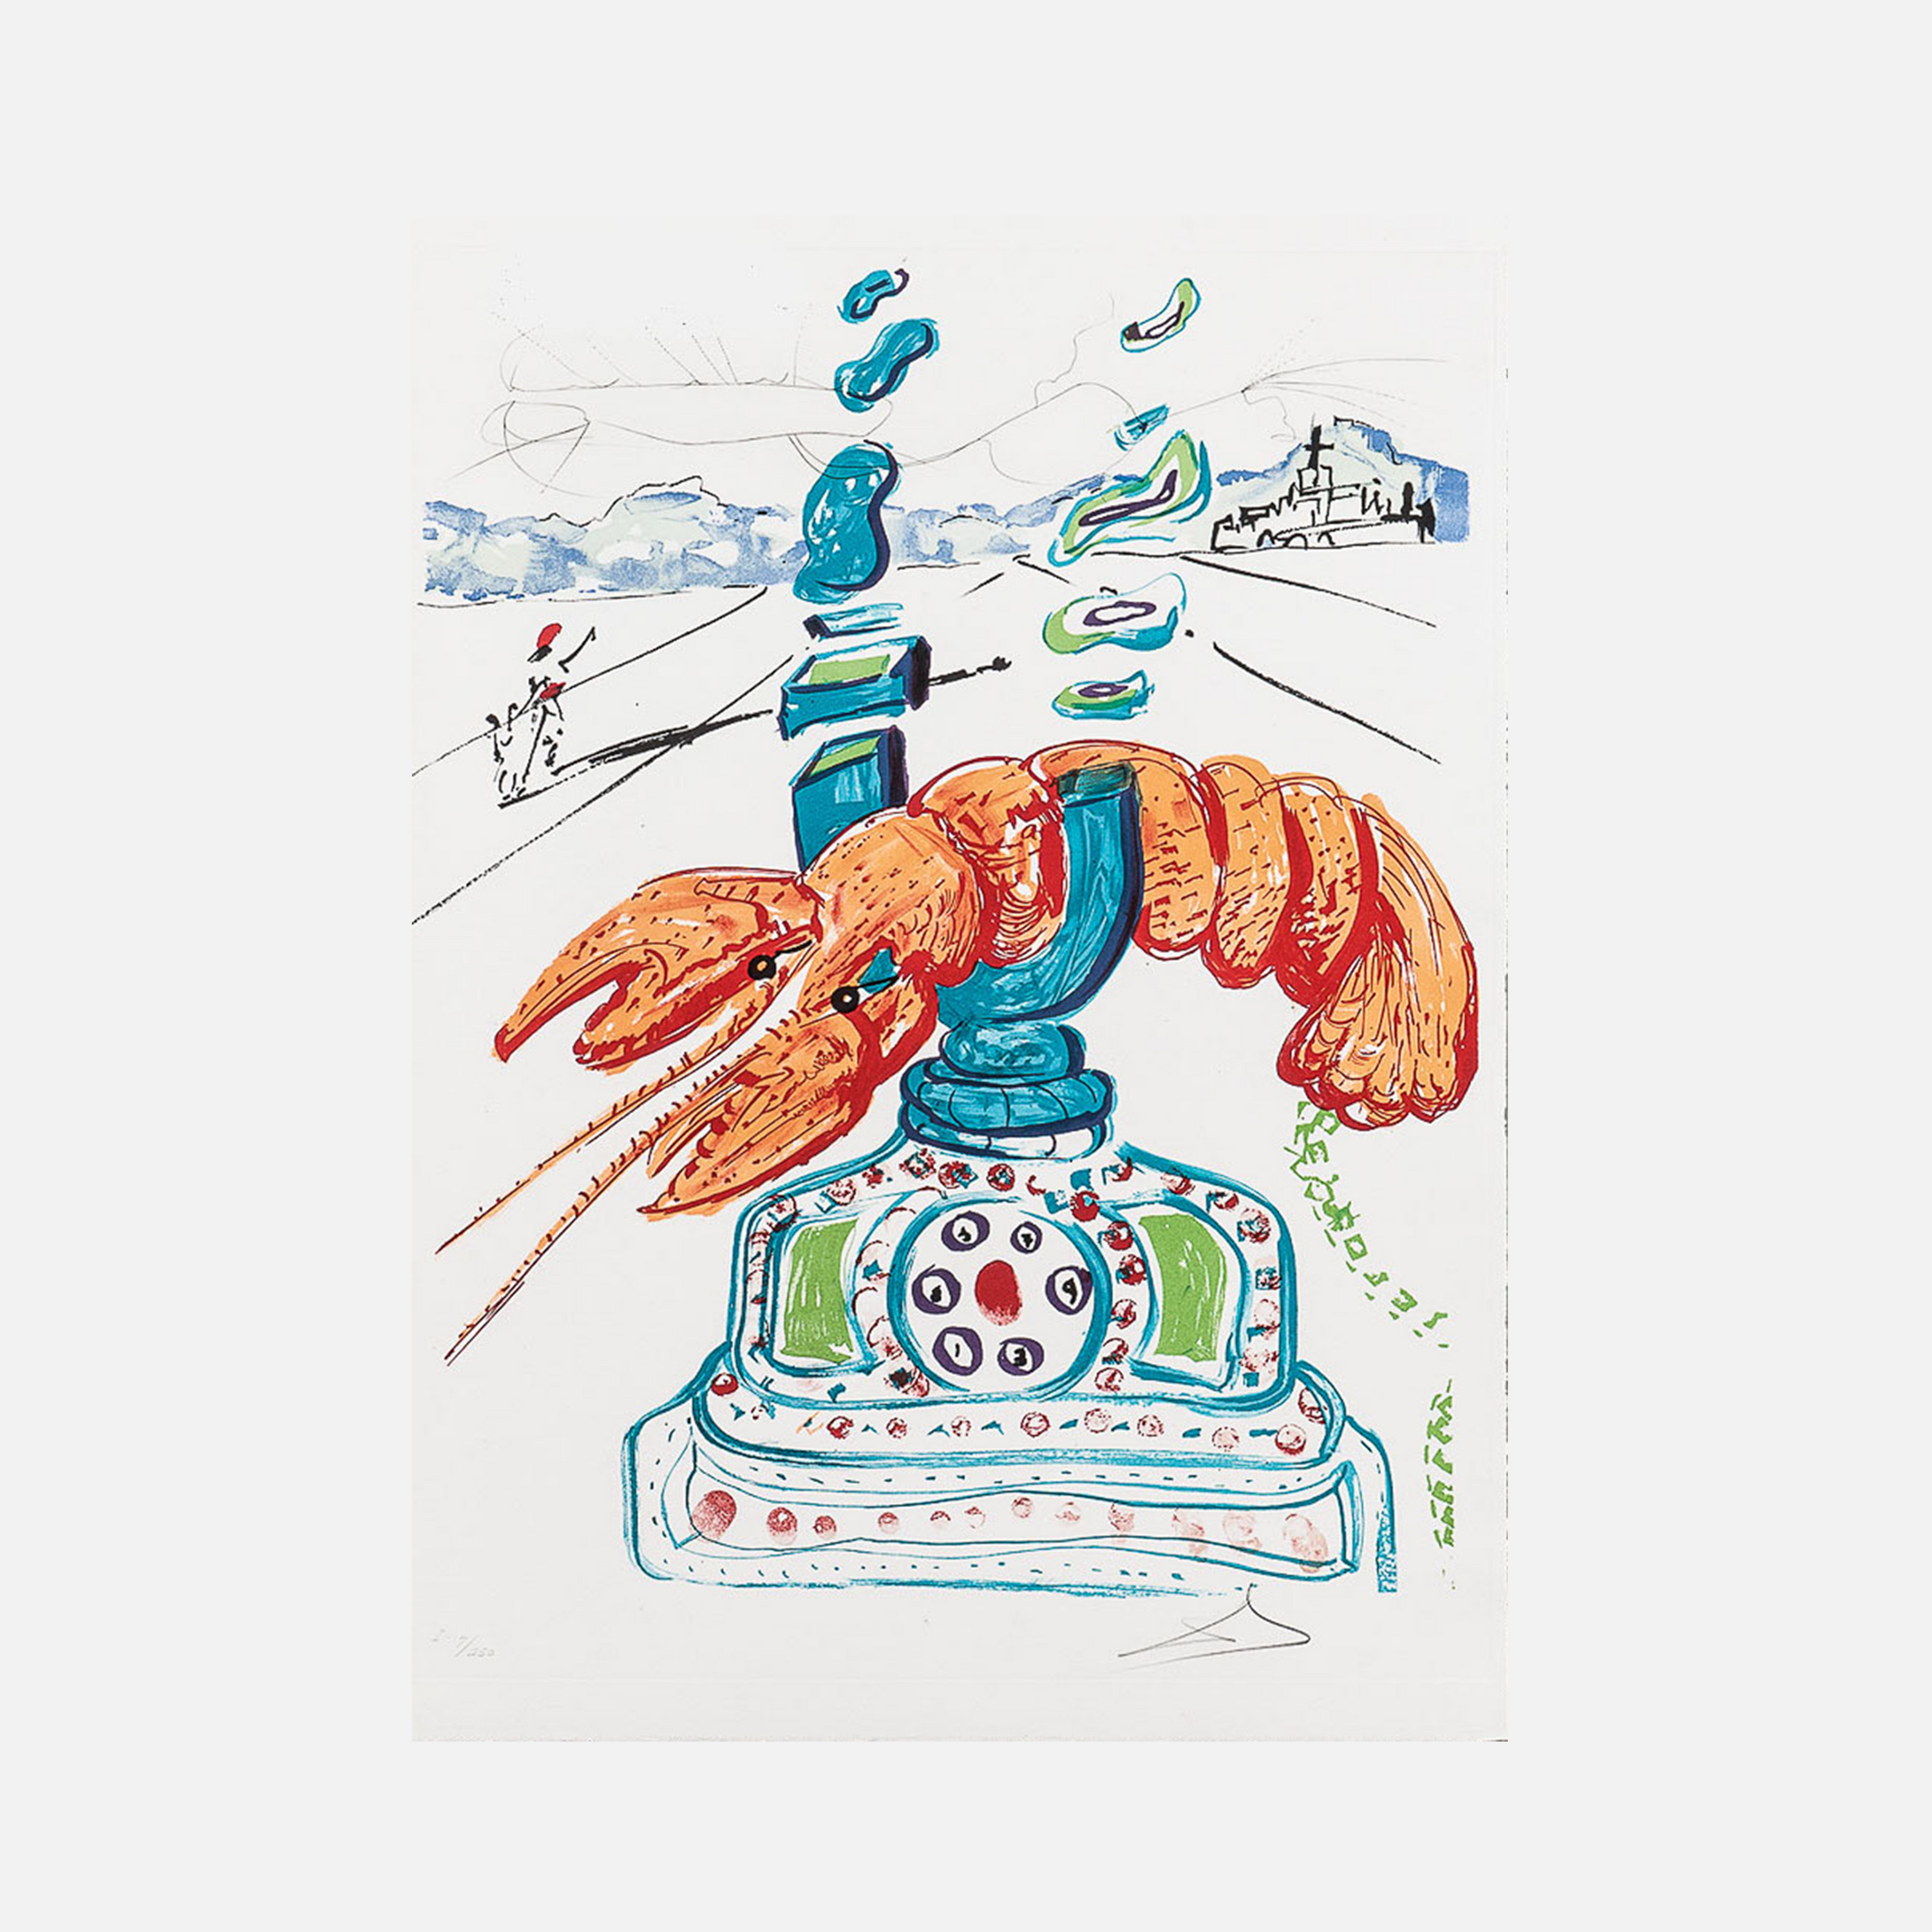 Cybernetic Lobster Telephone (Imagination & Objects of the Future Portfolio), 1975-1976